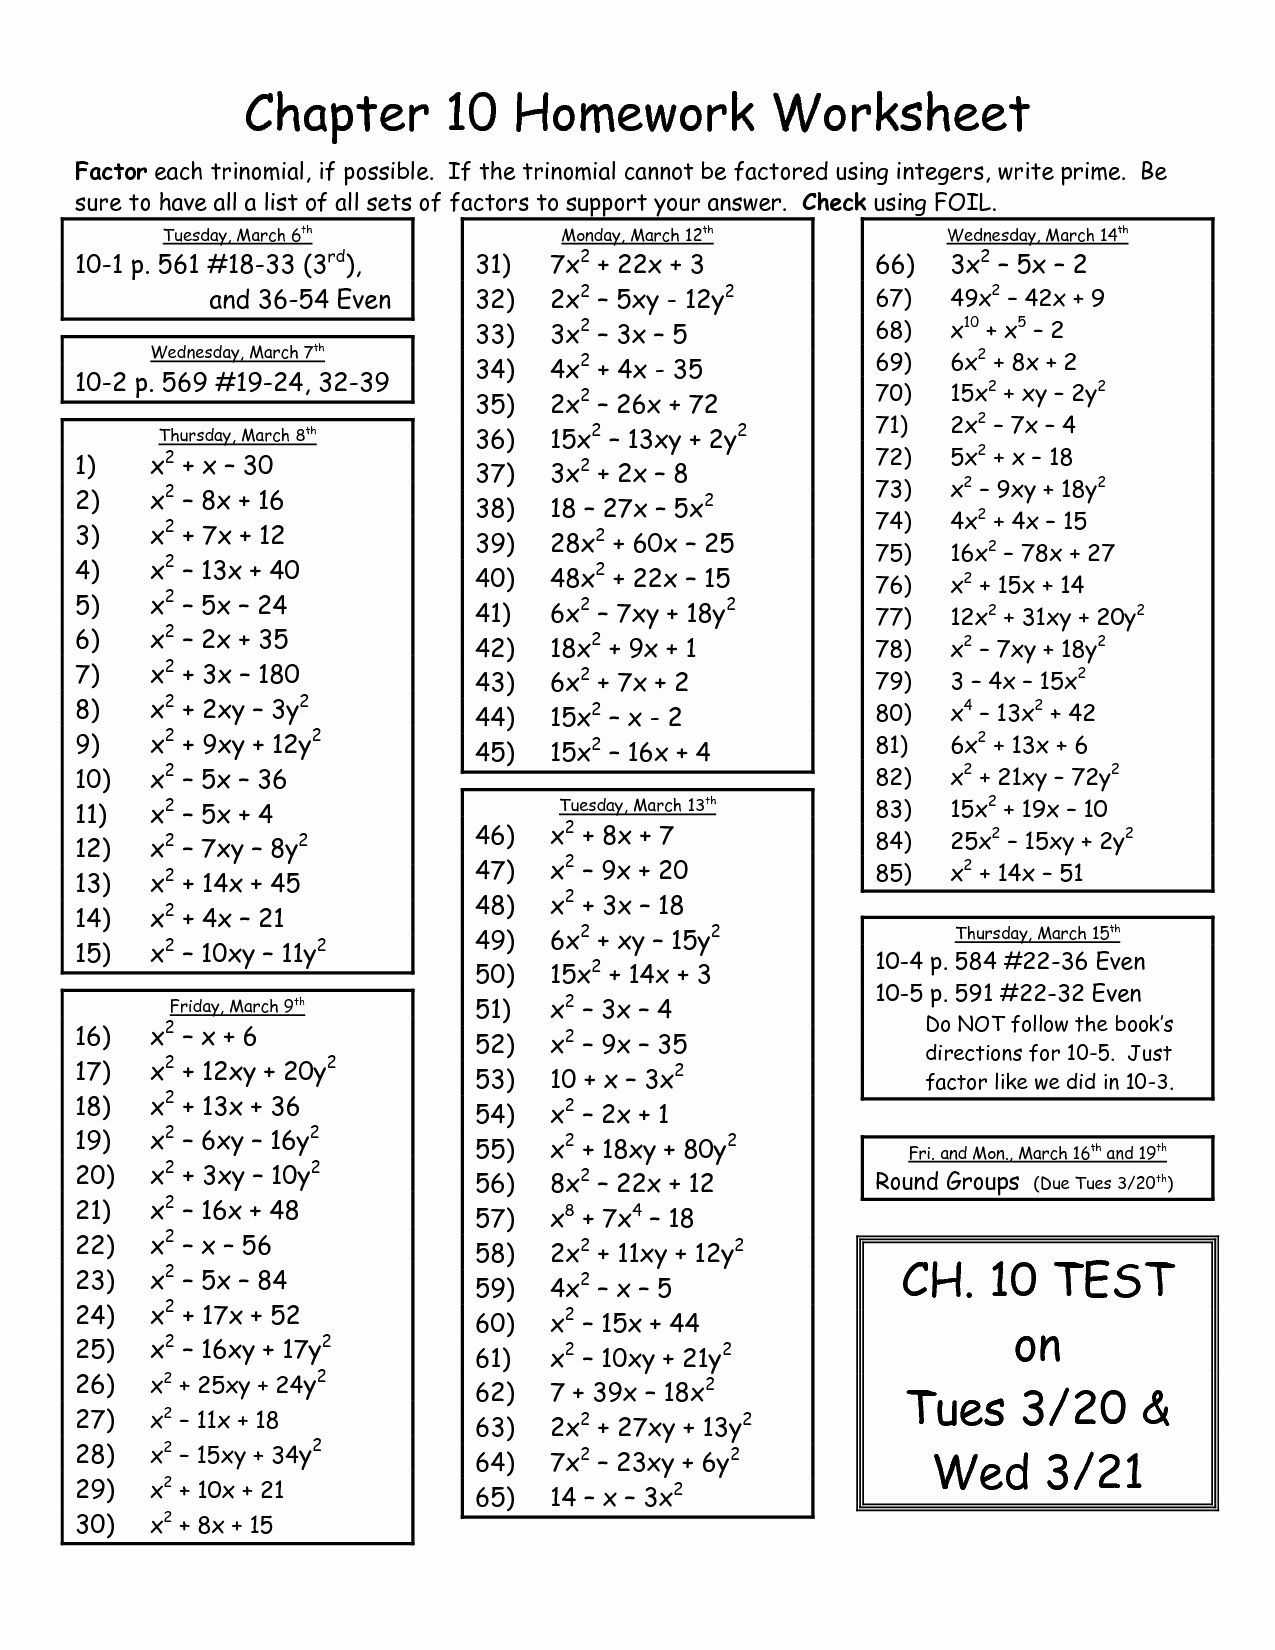 Factoring Trinomials Worksheet Answers 50 Factoring Trinomials Worksheet Answers In 2020